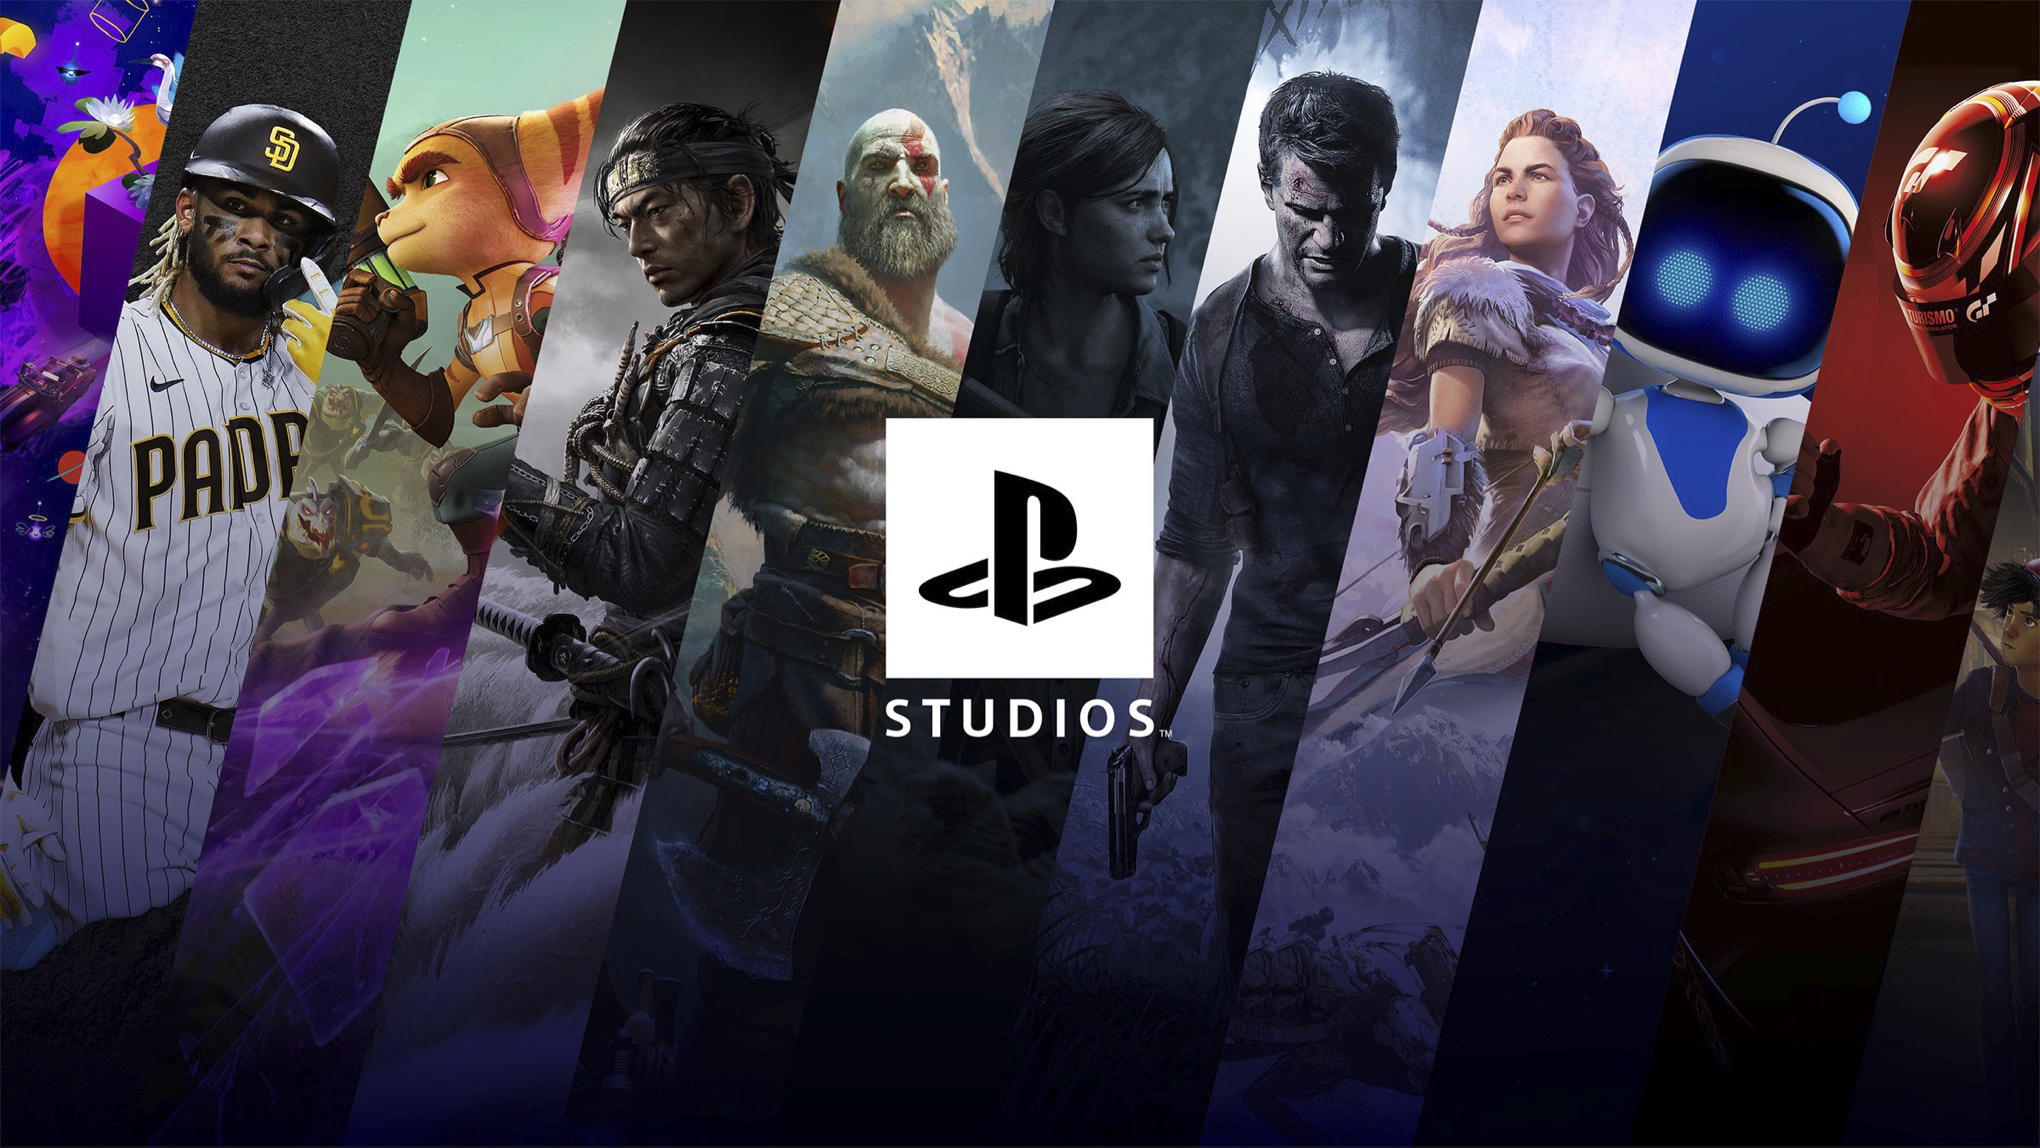 Ghost of Tsushima, Returnal and more heading to PC according to new leak